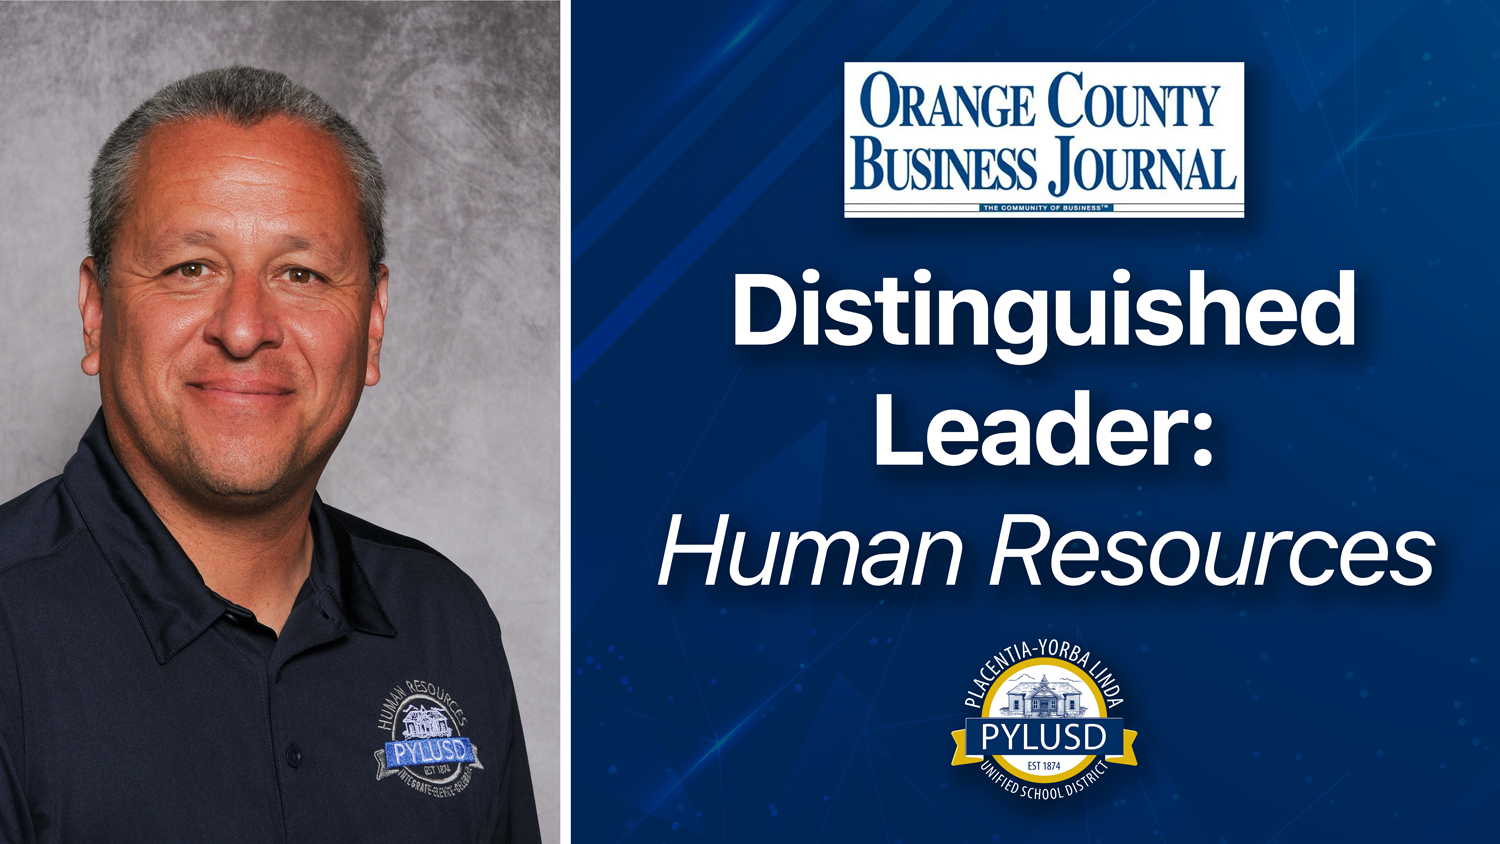 Mr. Rick Lopez, Assistant Superintendent of Human Resources, was recently distinguished as a 2022 Distinguished Leaders in Human Resources by the Orange County Business Journal.